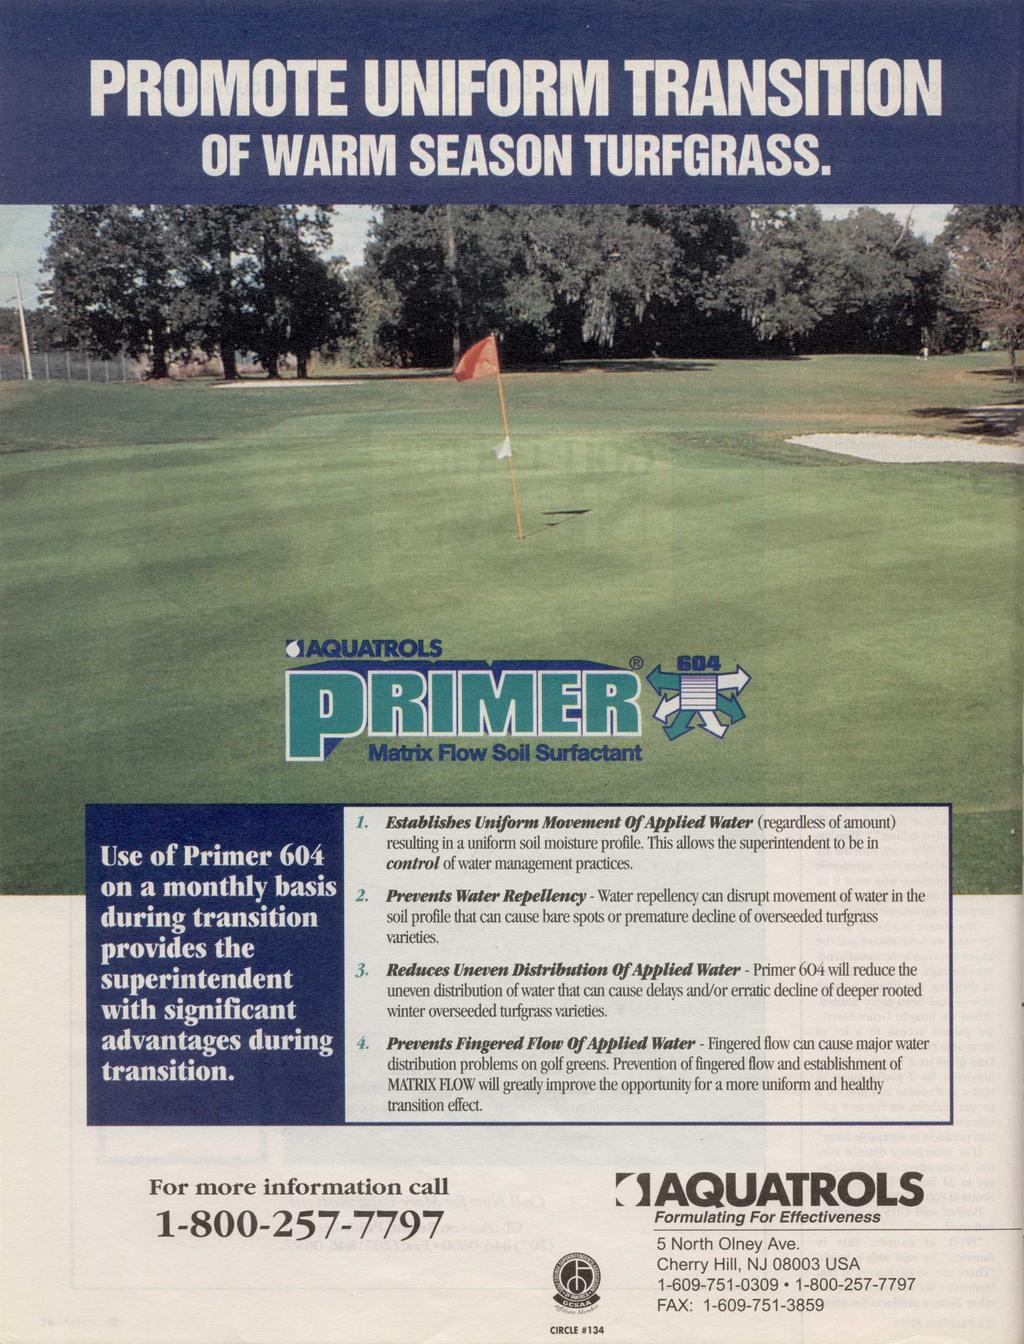 PROMOTE UNIFORM TRANSITION OF WARM SEASON TURFGRASS. Use of Primer 604 on a monthly basis during transition provides the superintendent with significant advantages during transition.